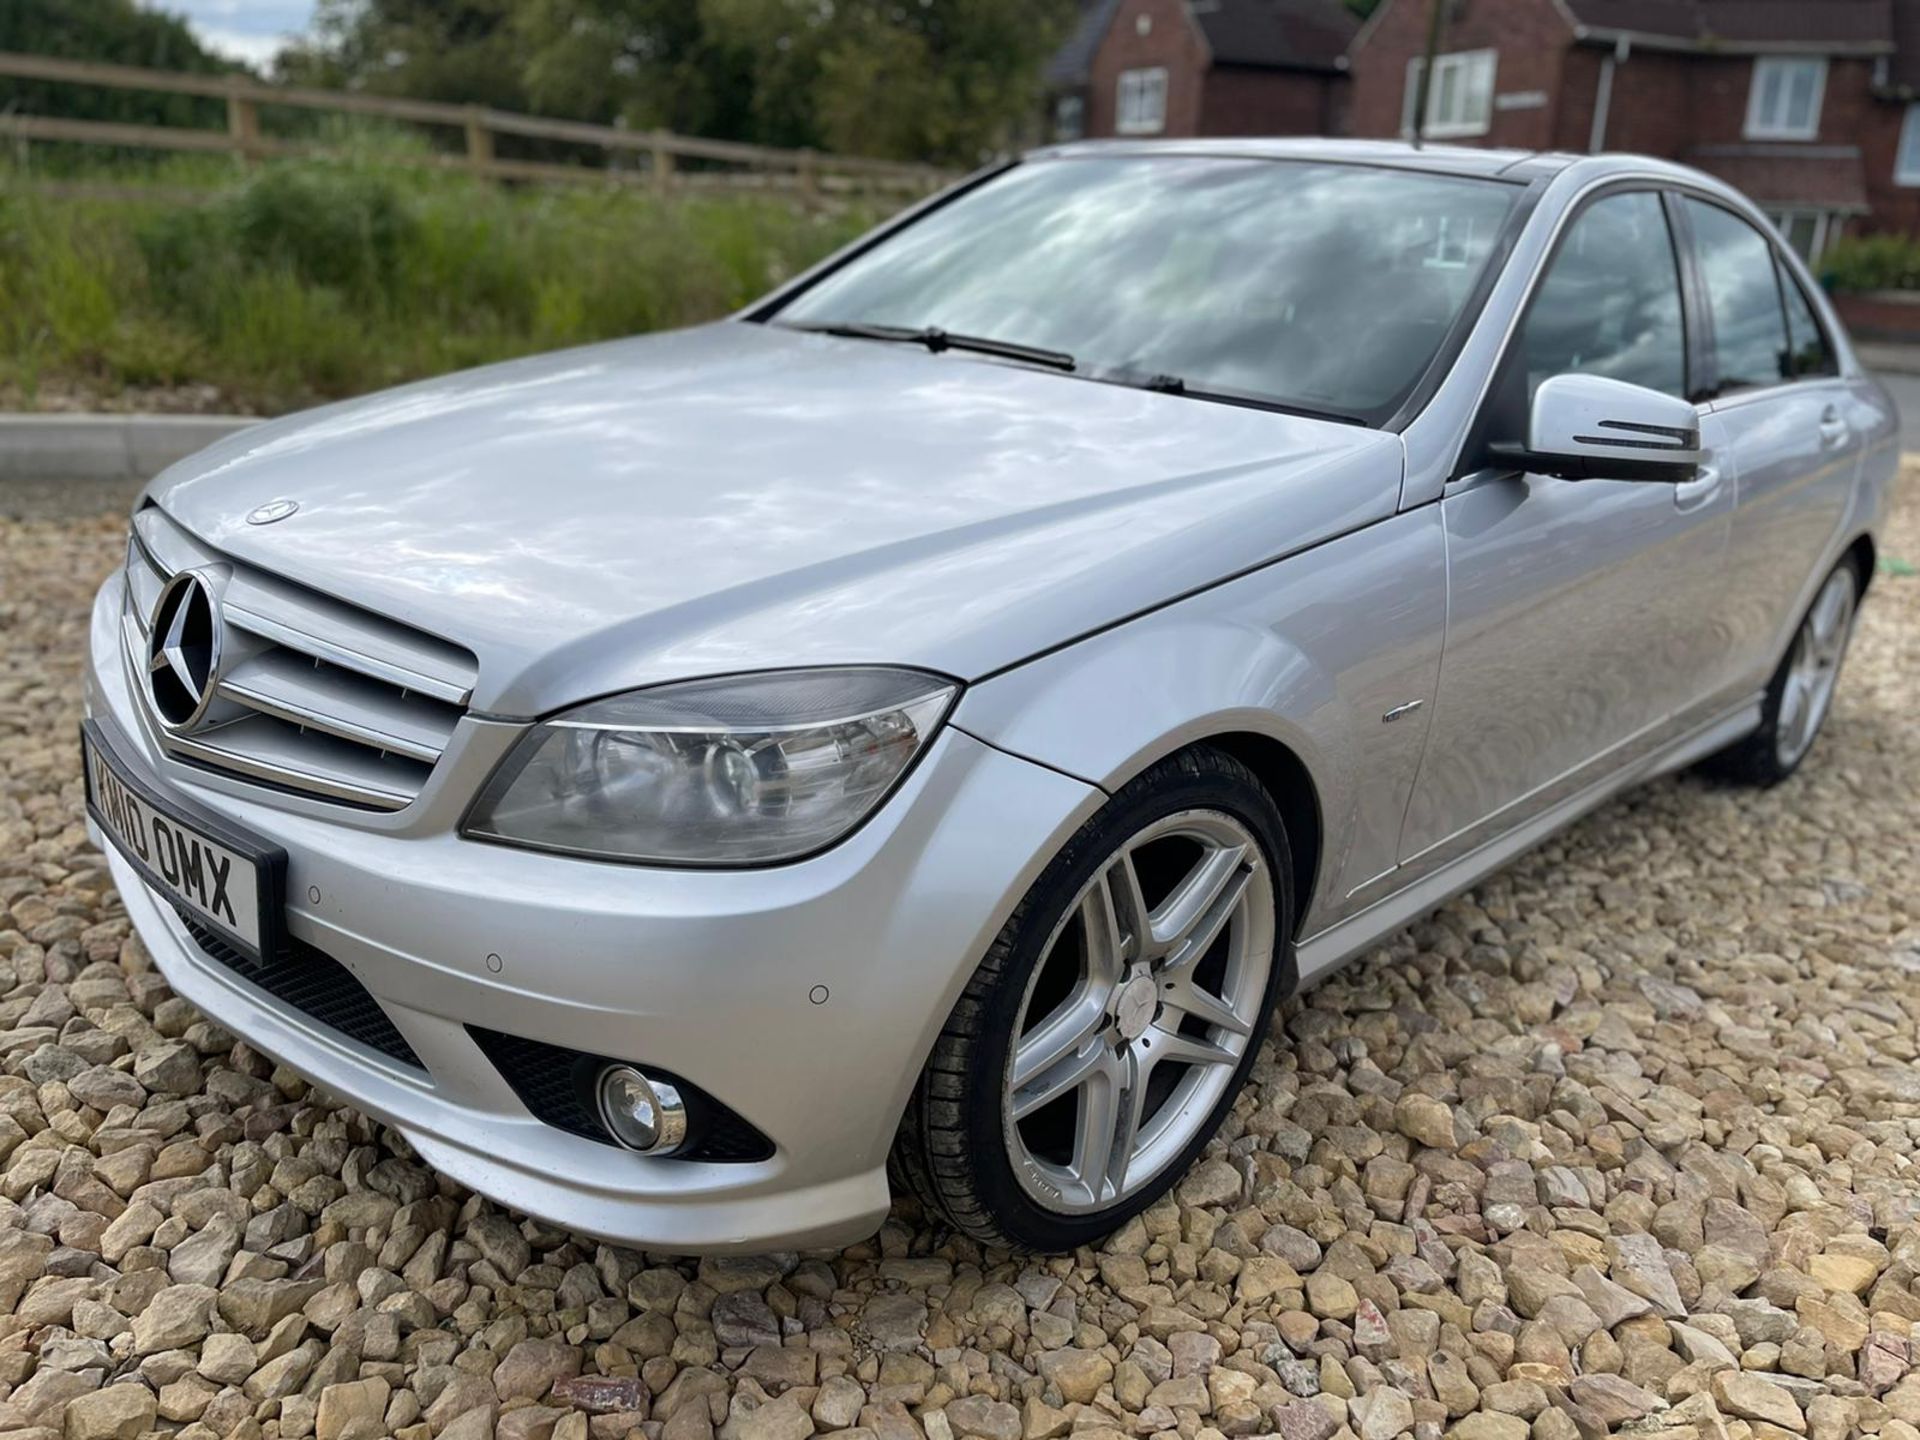 2010 MERCEDES-BENZ C220 BLUEF-CY SPORT CDI A, PANORAMIC ROOF AND PHONE CONNECTIVITY *NO VAT*